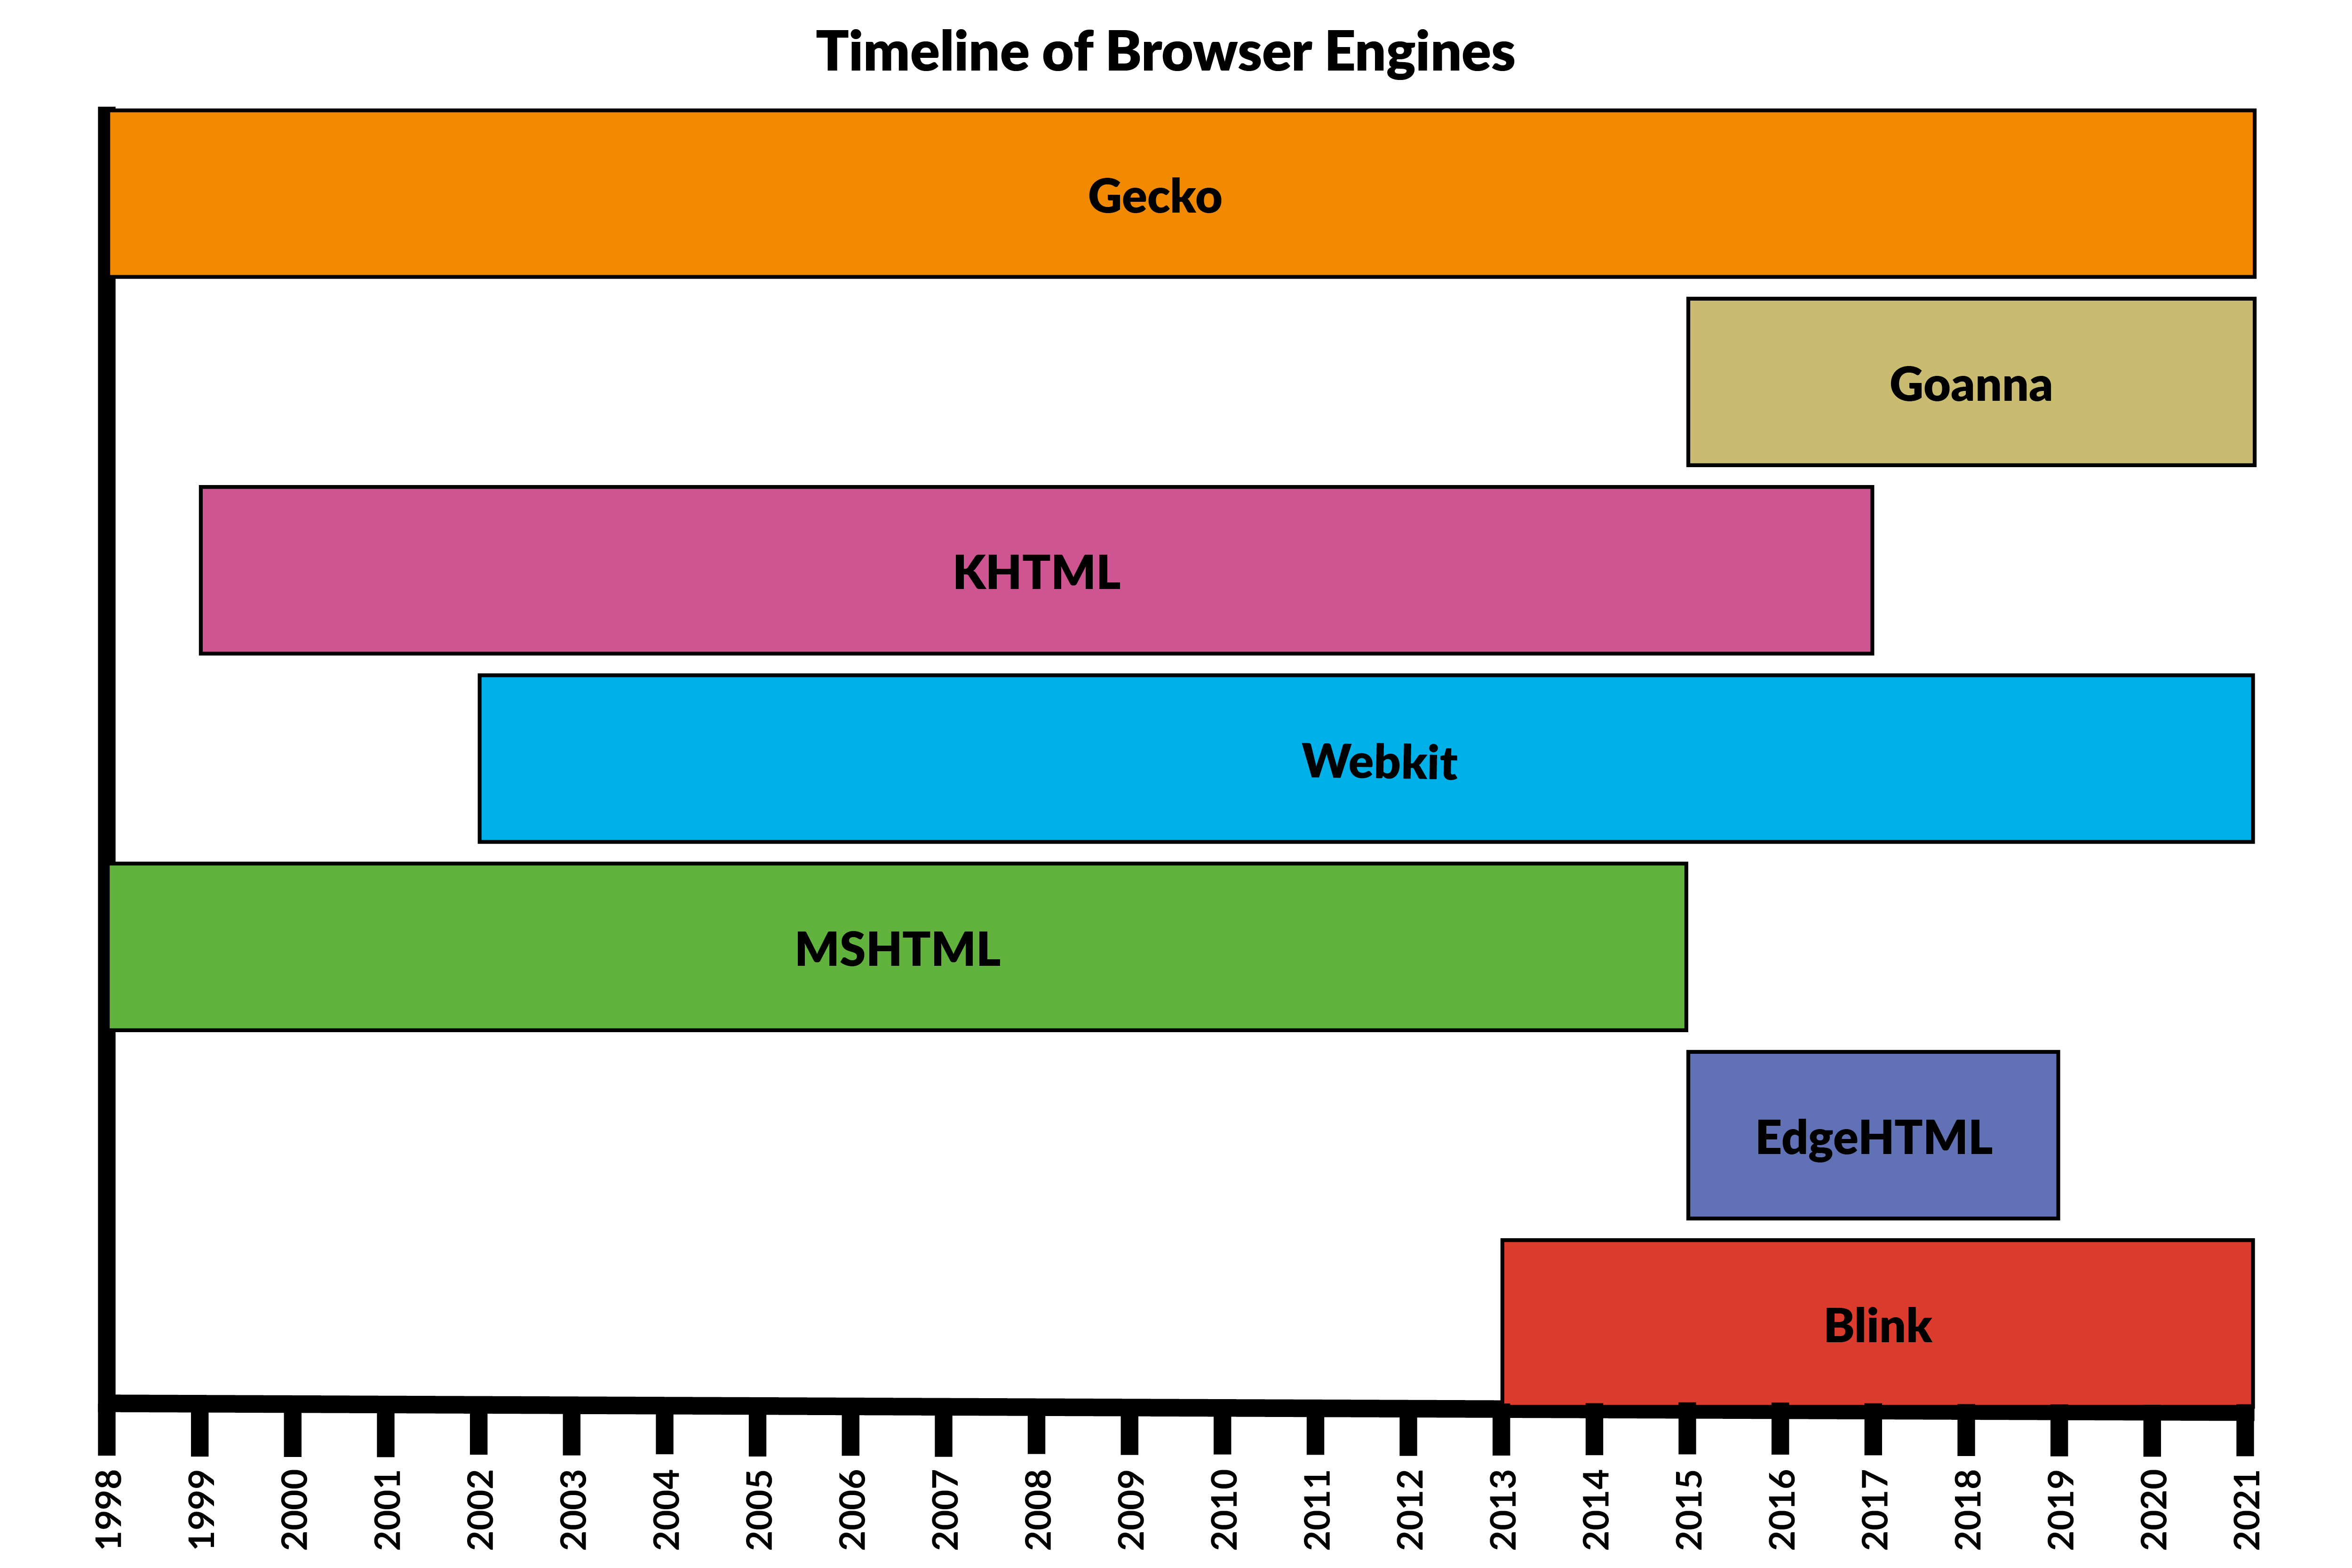 A diagram showing when the available browser engines came into being, featuring KHTML, EdgeHTML, MSHTML, Gecko, Goanna, Blink , and WebKit